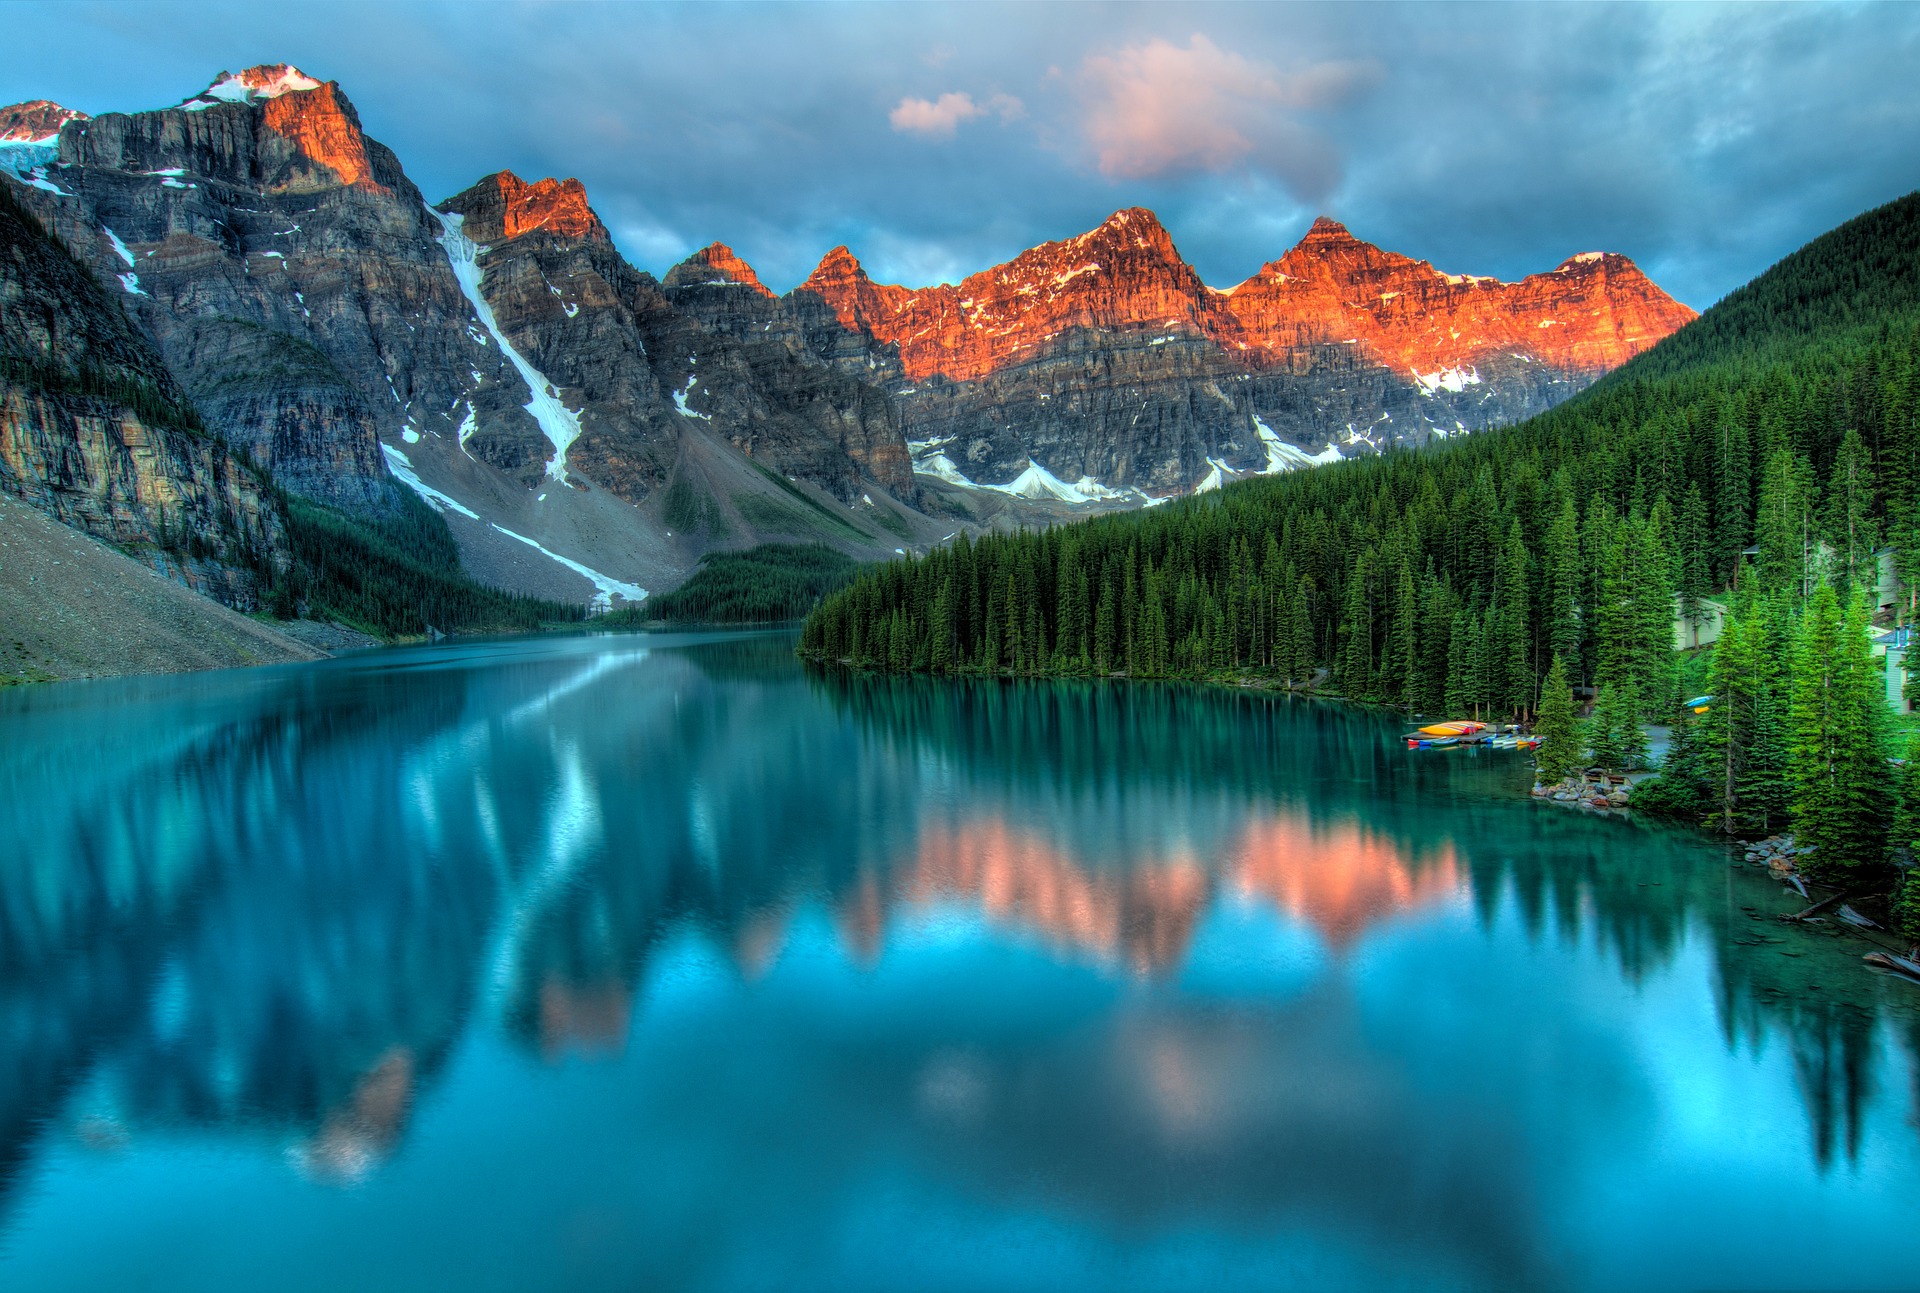 Turquoise lake in Canada with mountains and forest in the background